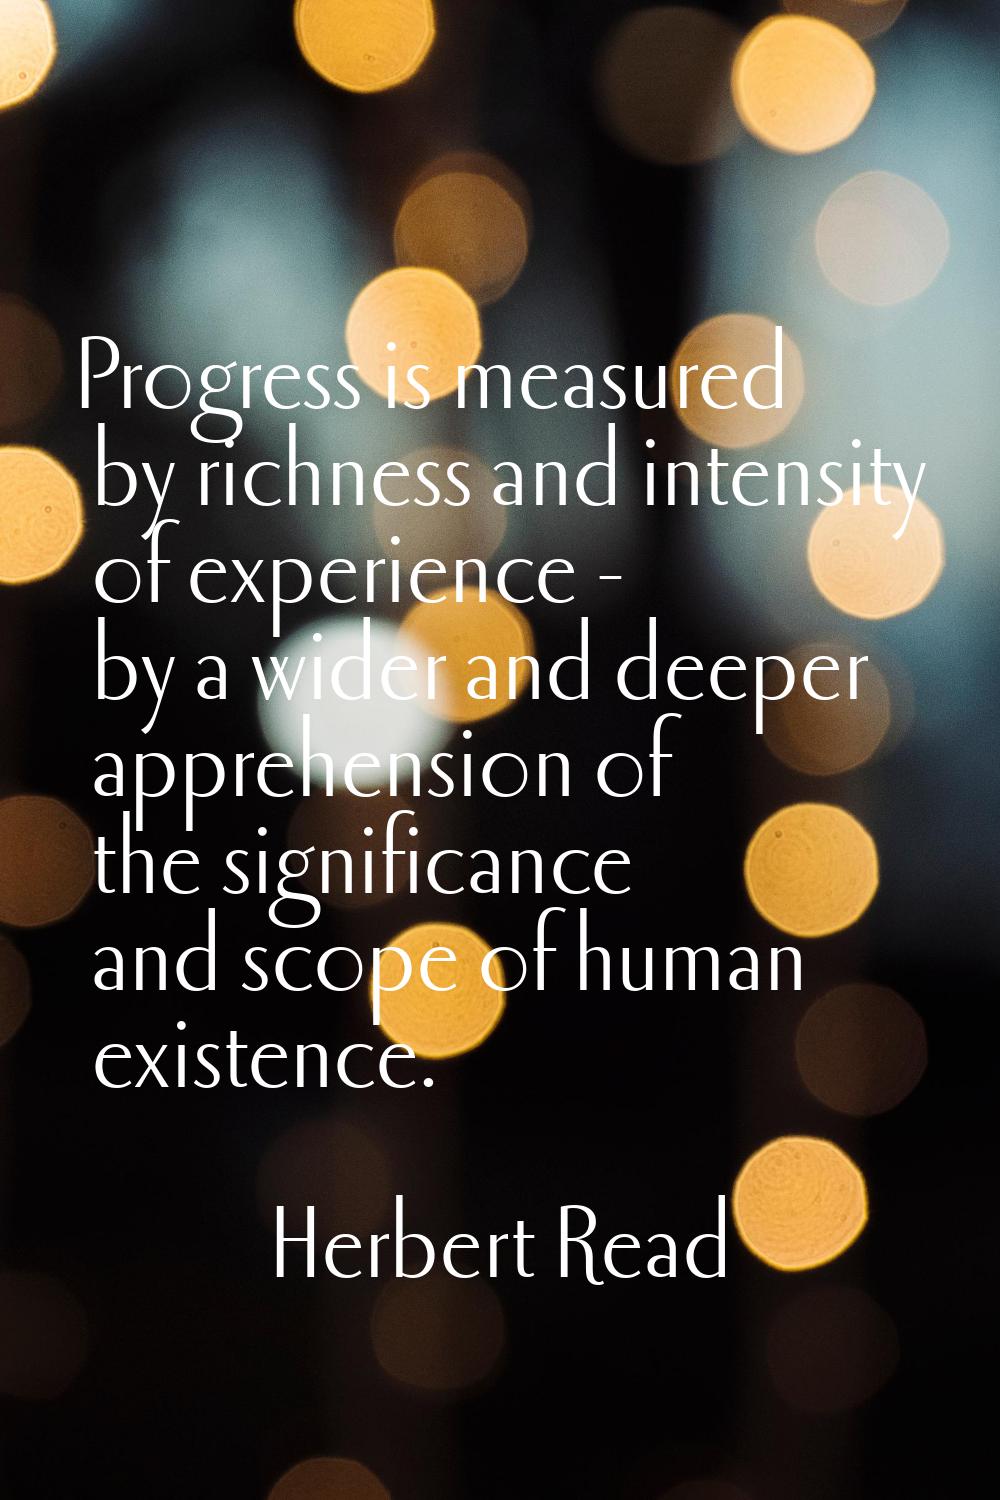 Progress is measured by richness and intensity of experience - by a wider and deeper apprehension o